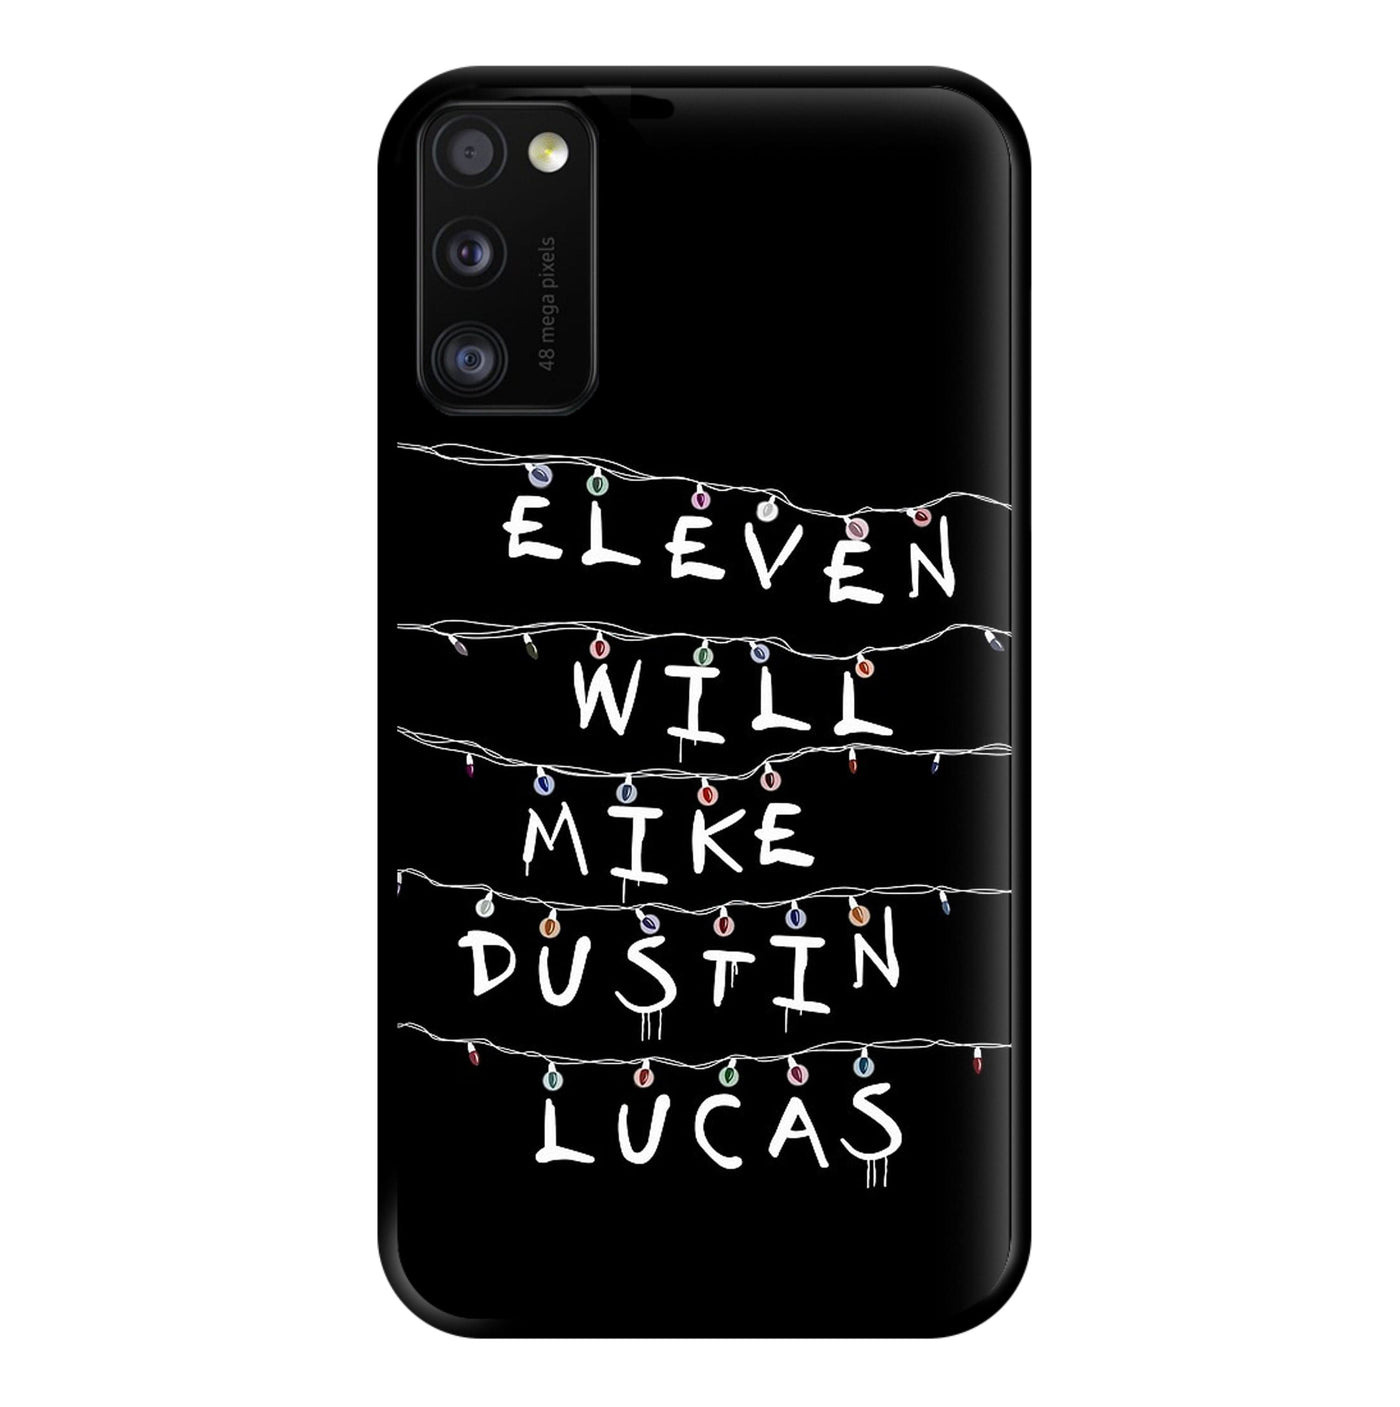 Eleven, Will, Mike, Dustin & Lucas - Stranger Things Phone Case